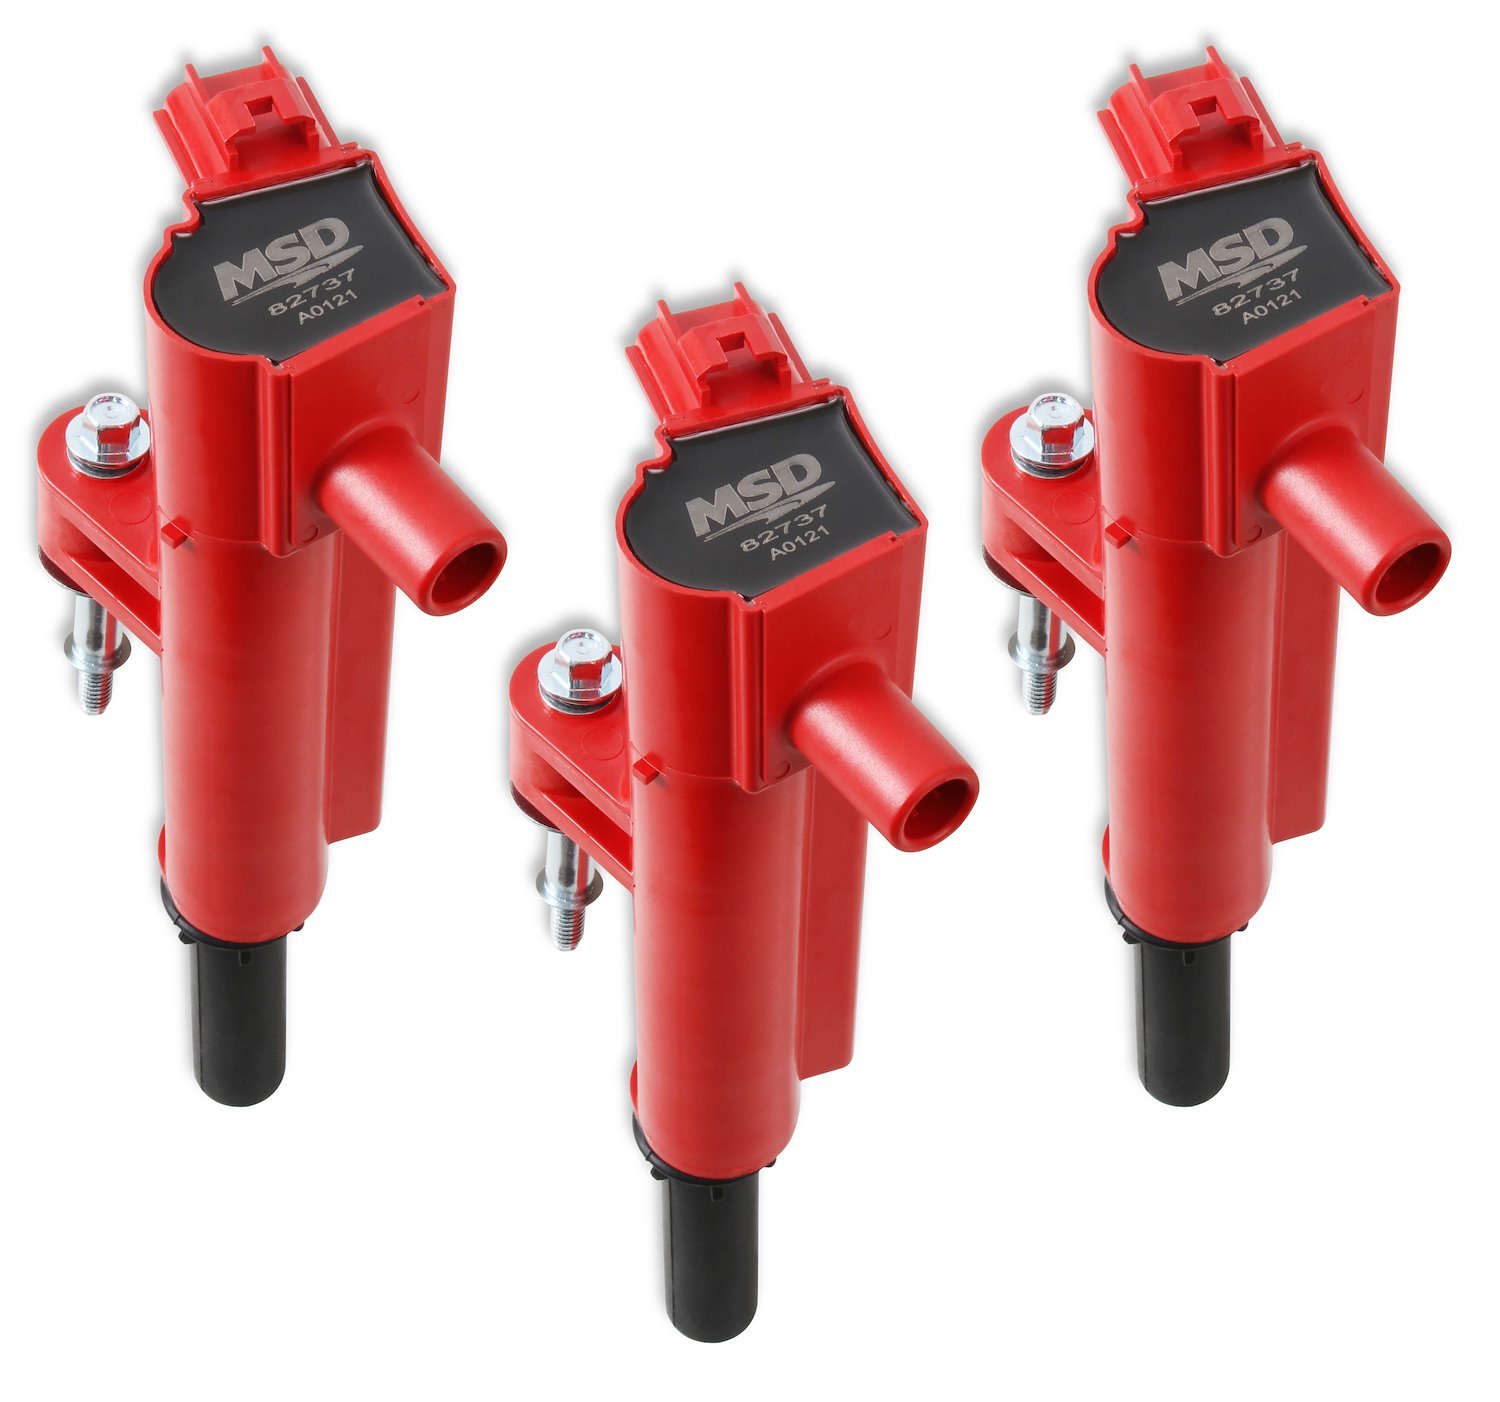 Blaster Series Dual Output Ignition Coils Fits 2009-2013 Dodge/Ram/Jeep 3.7L, Red, Set of 3